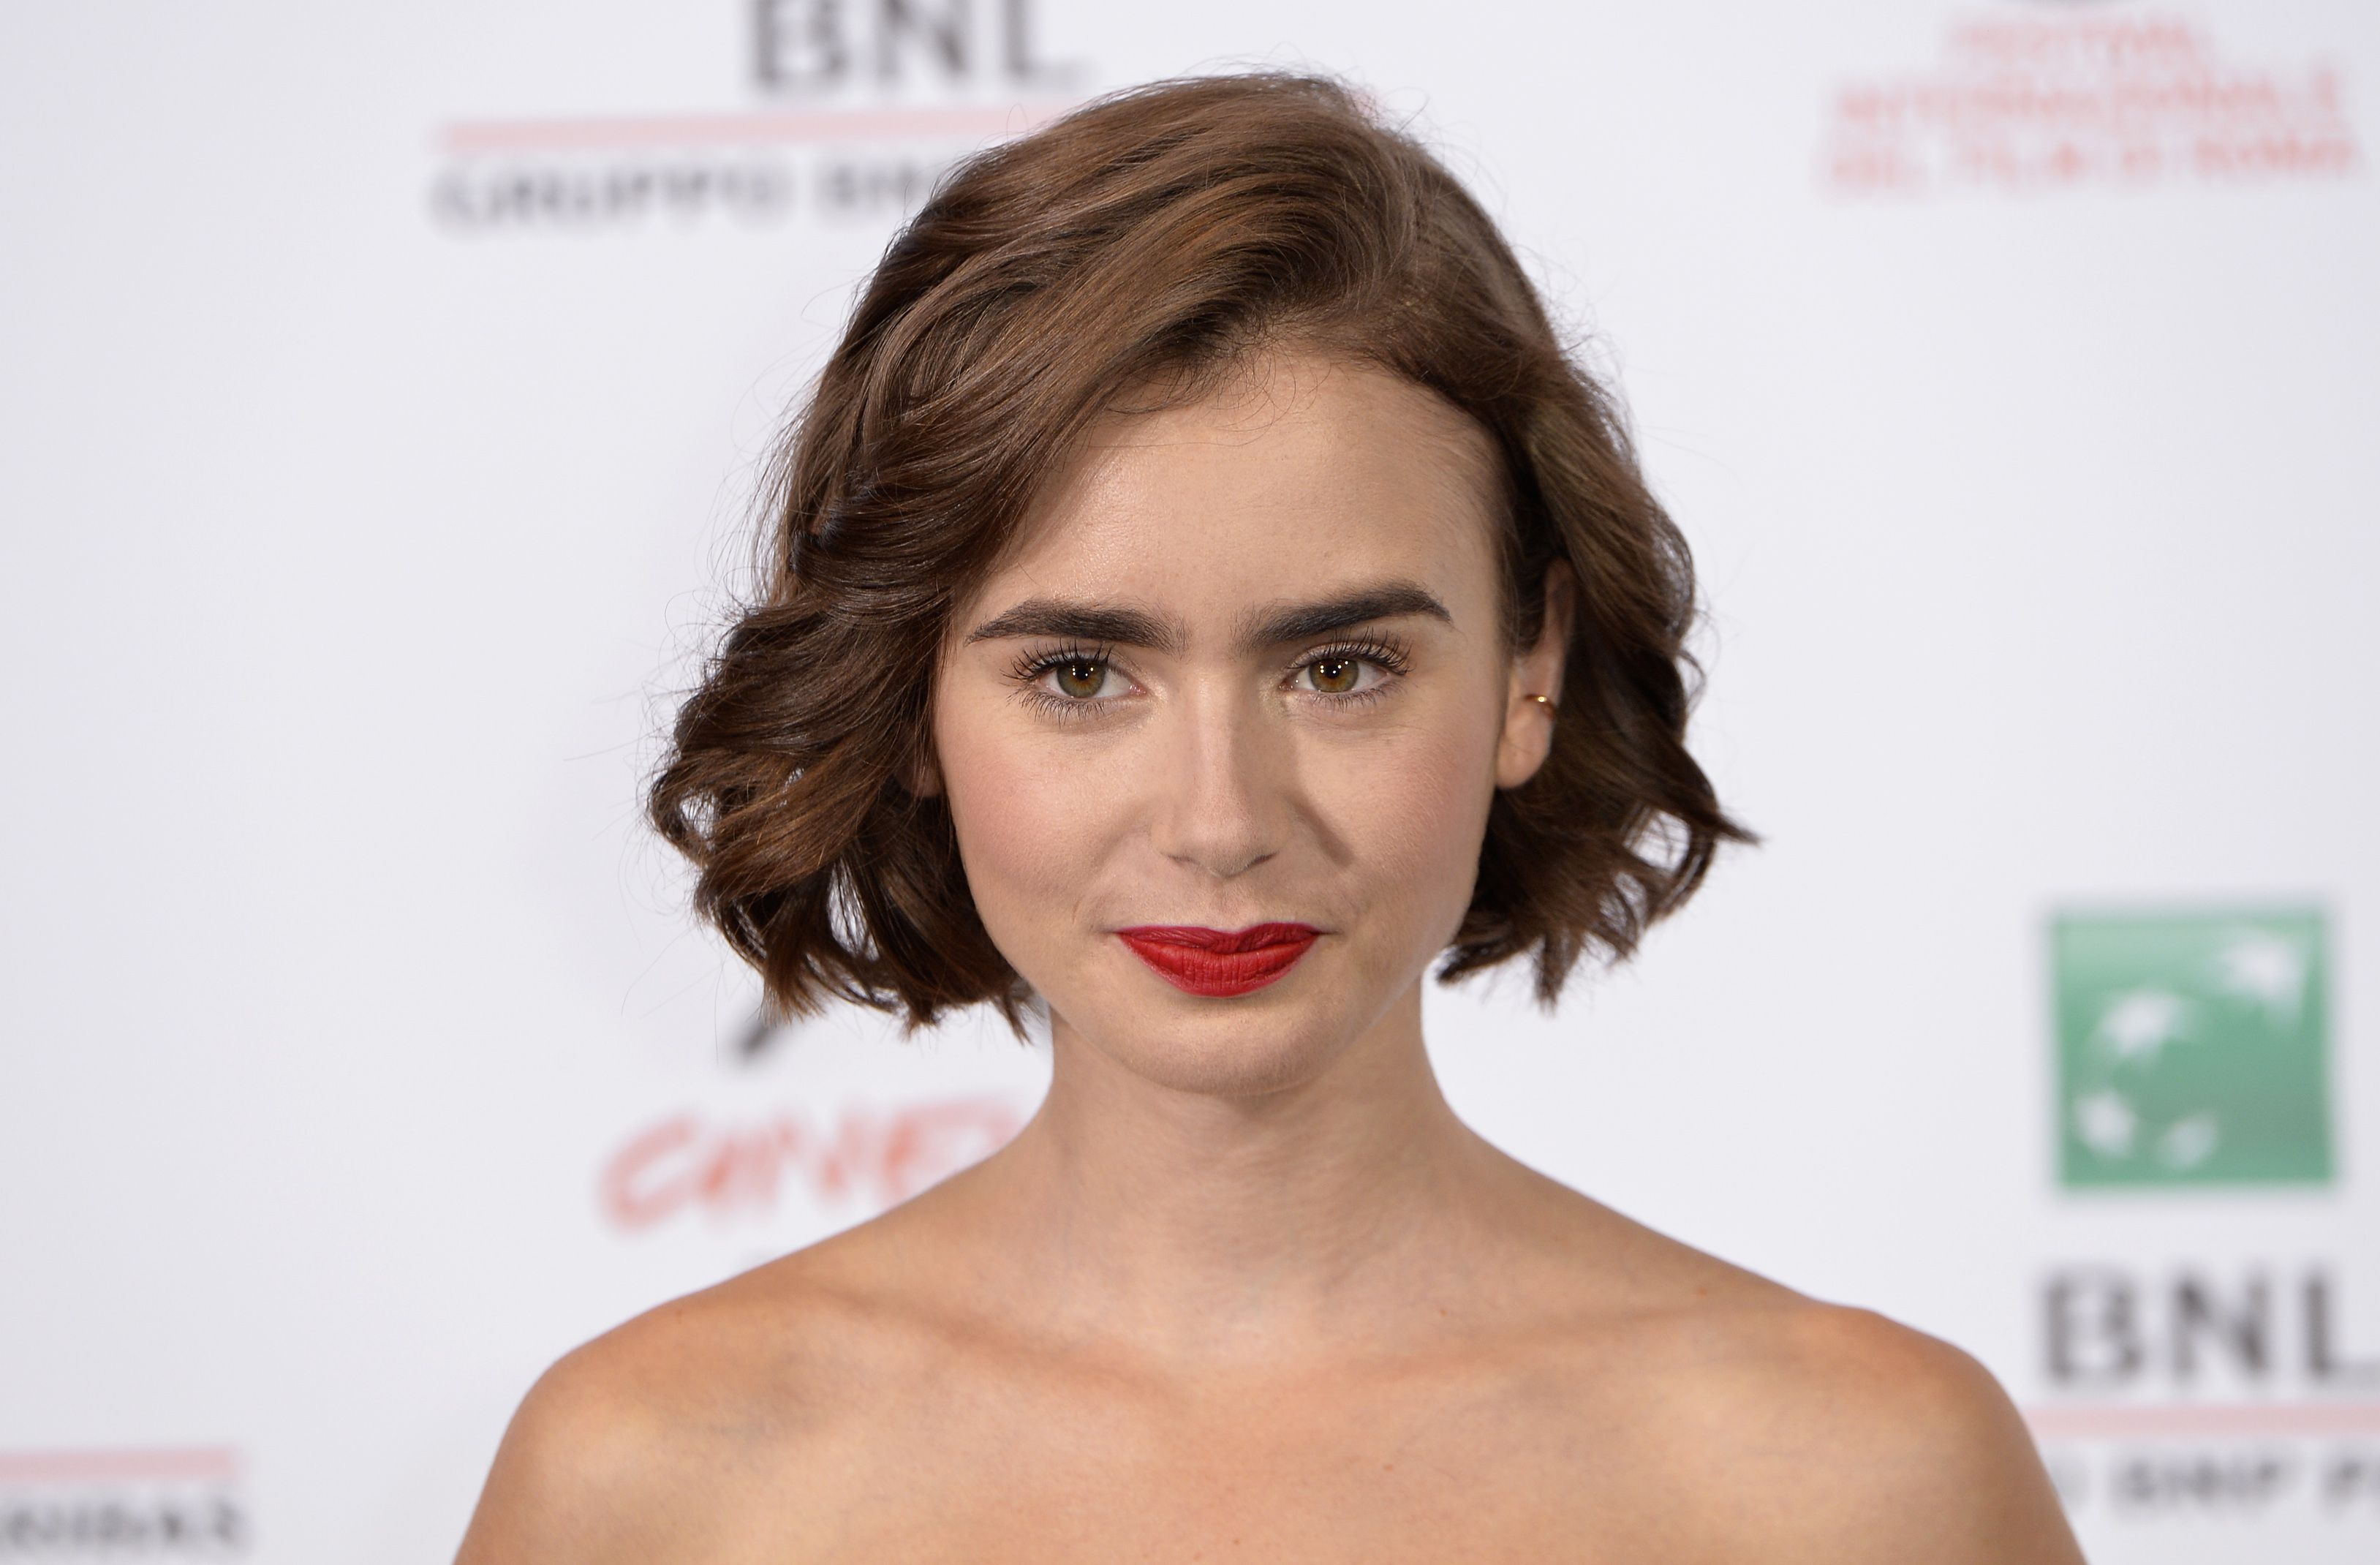 Short Haircut Ideas  Katy Perry Lily Collins LilyRose Depp  Vogue